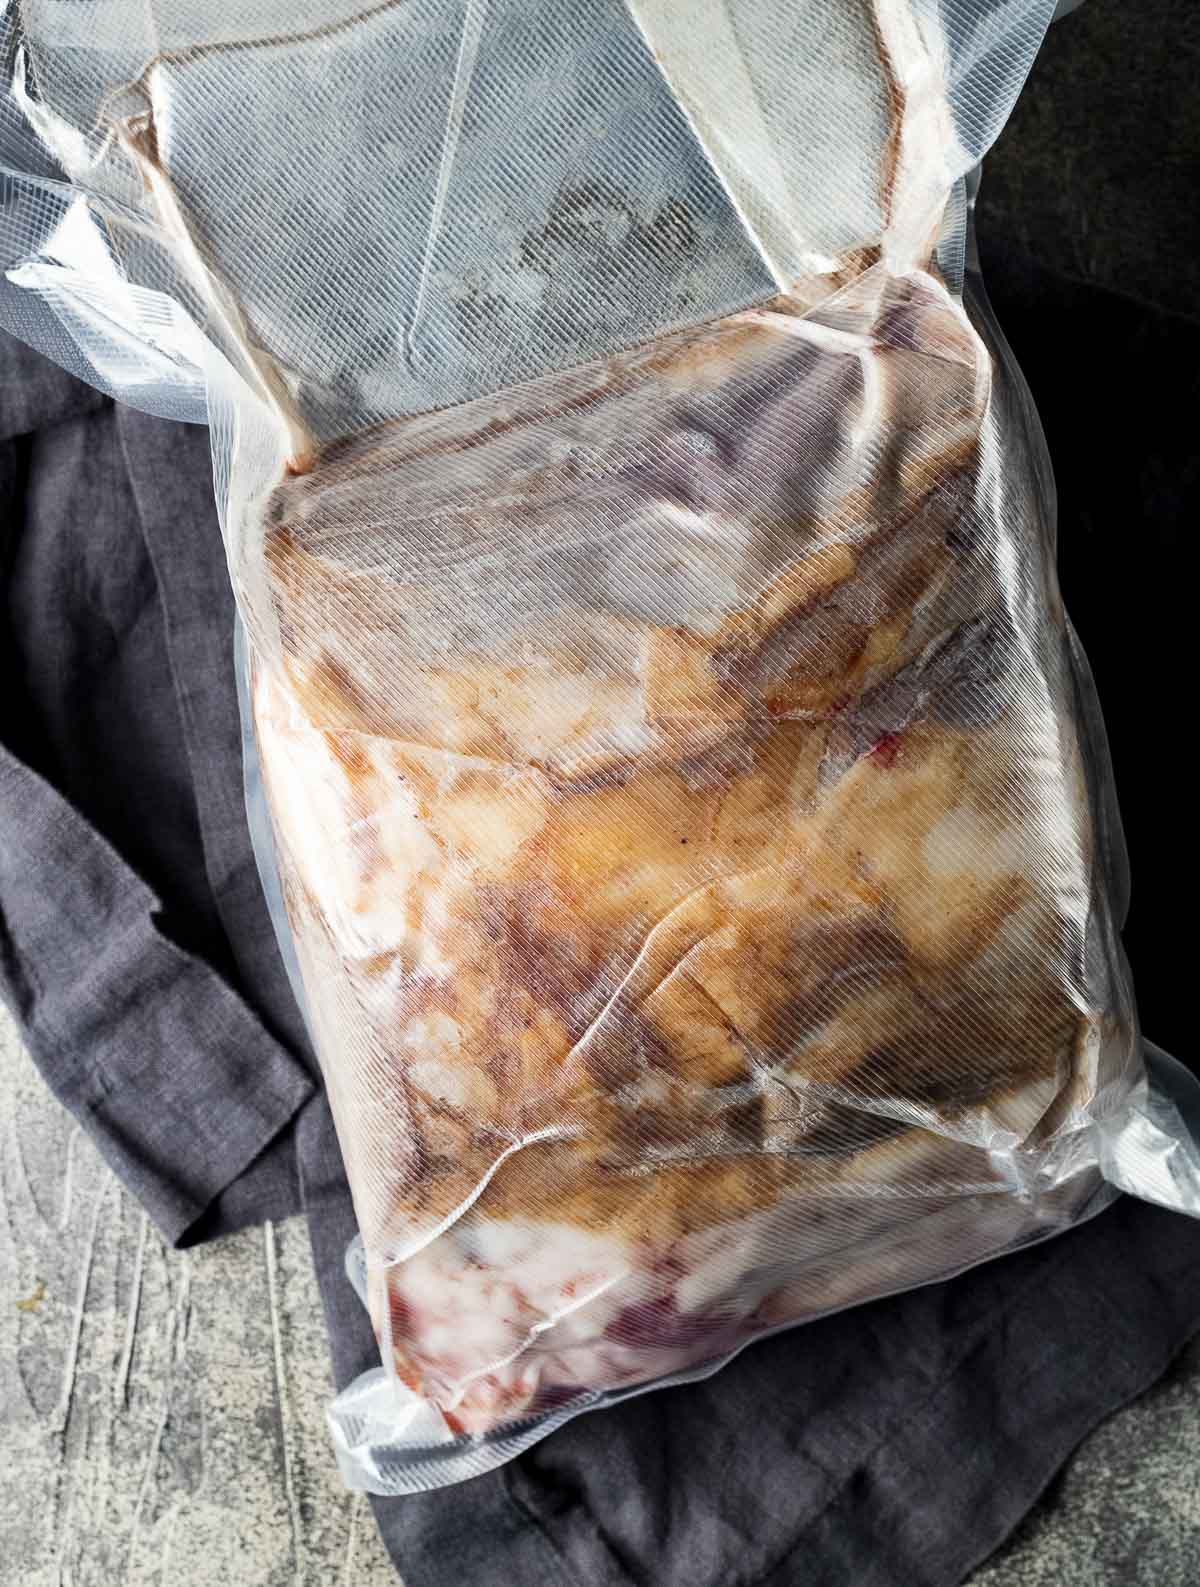 Rib roast sealed in a large sealable bag.